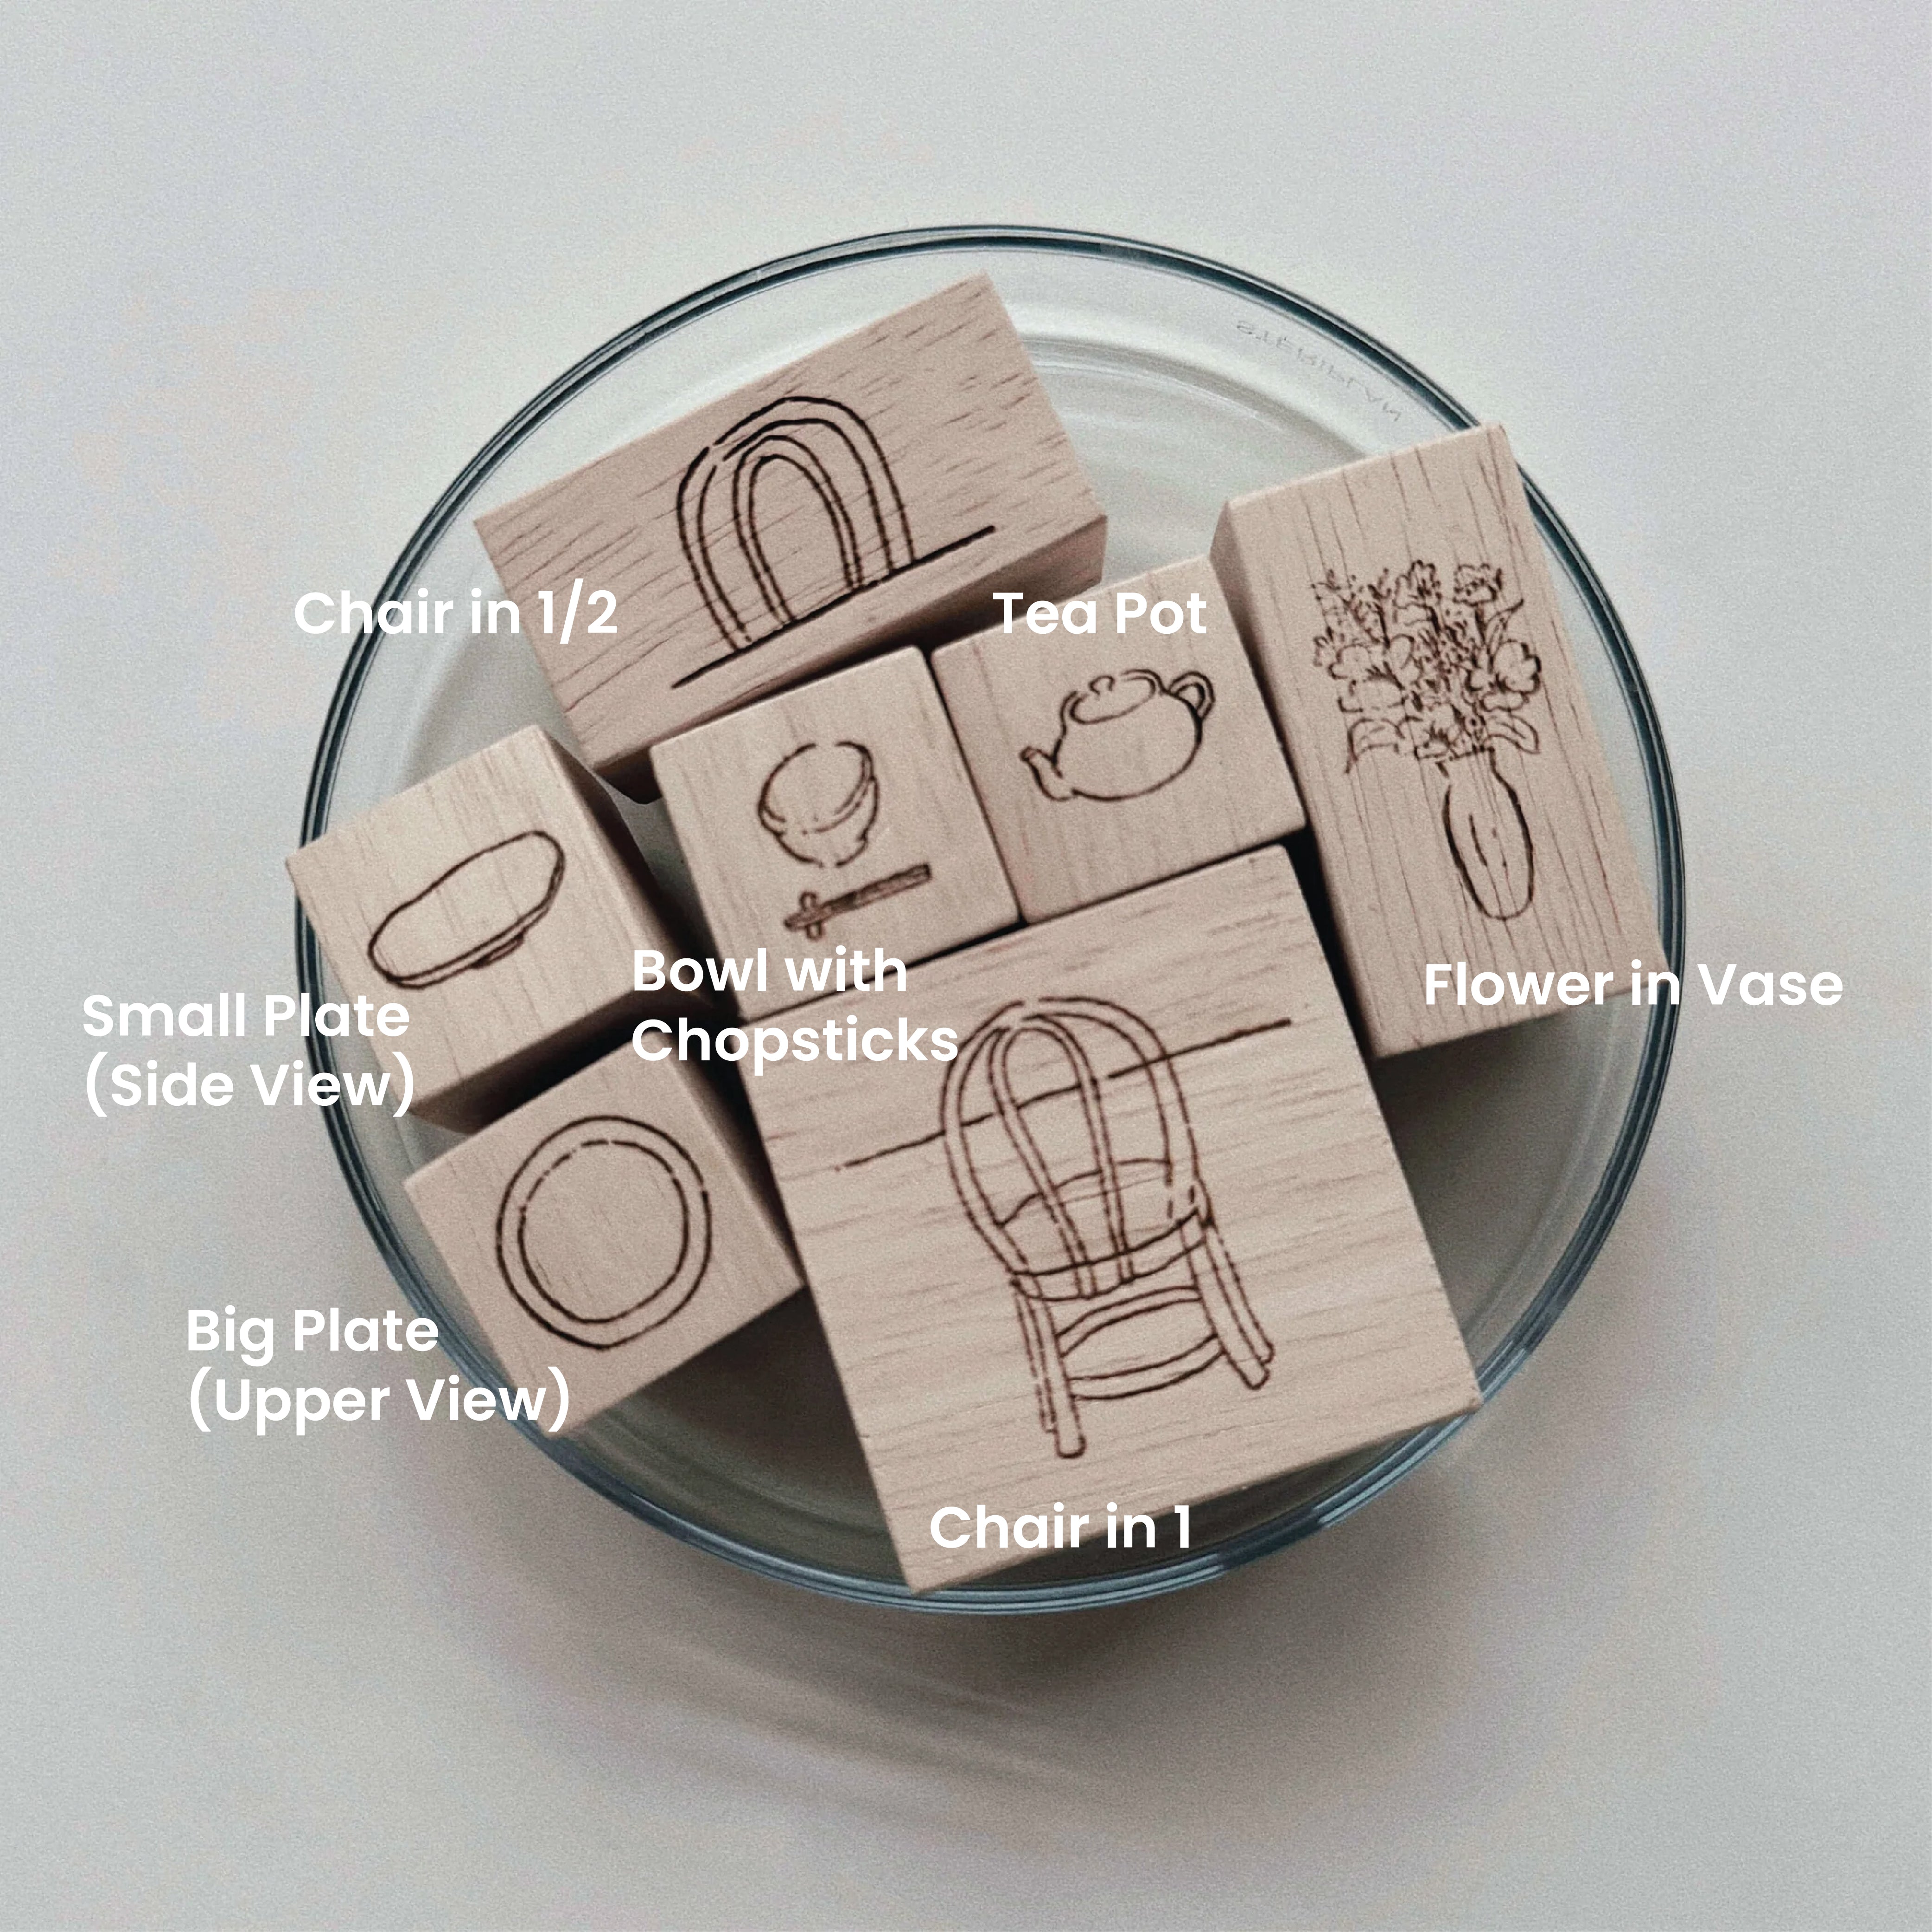 SOM Studio x wenyea Rubber Stamp: Everyday Tools 2.0-Big Plate (Upper View)